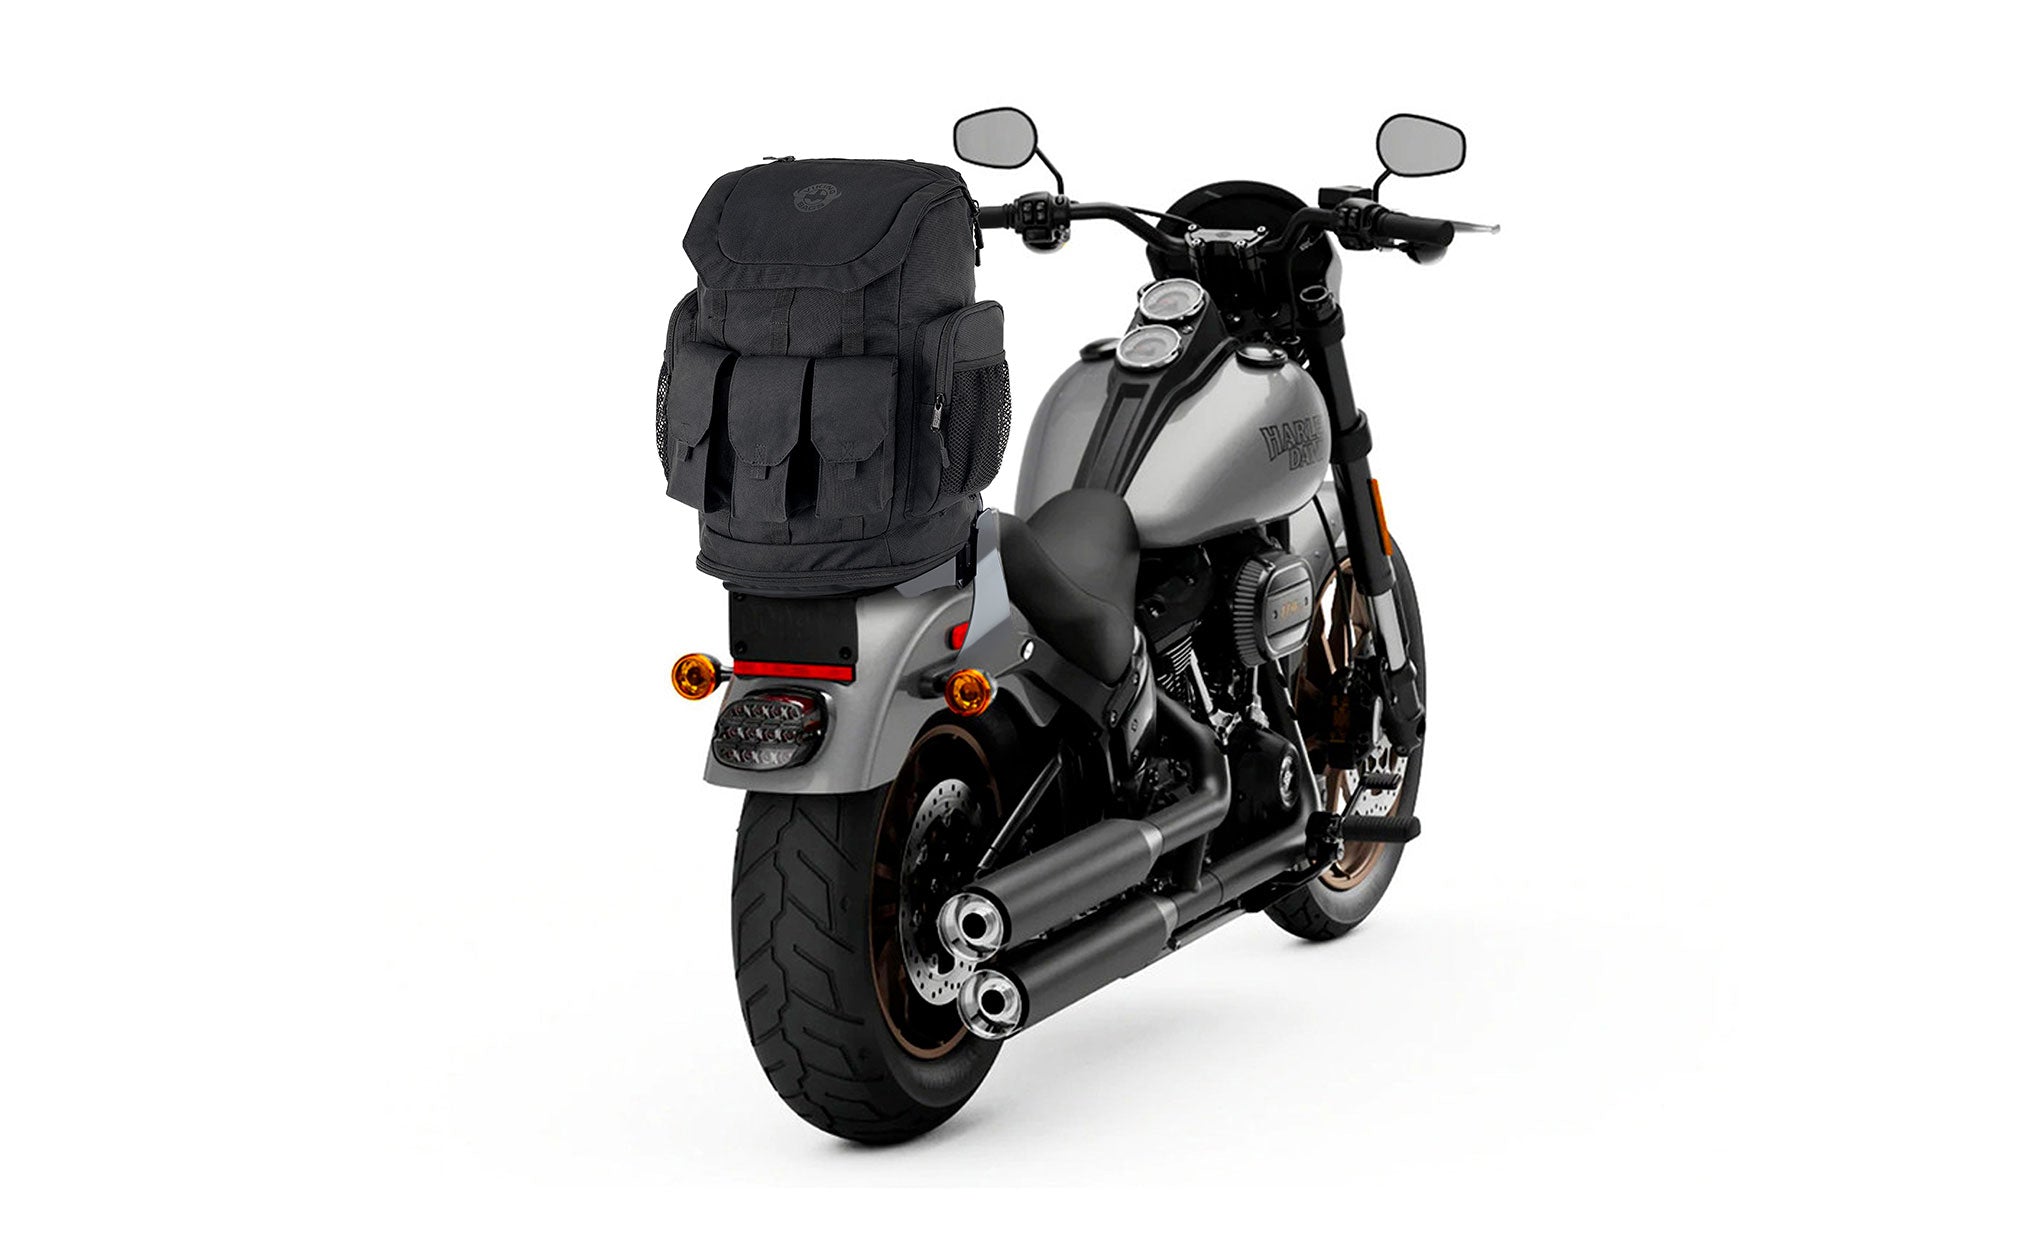 Viking Trident XL Motorcycle Sissy Bar Backpack Bag on Bike View @expand